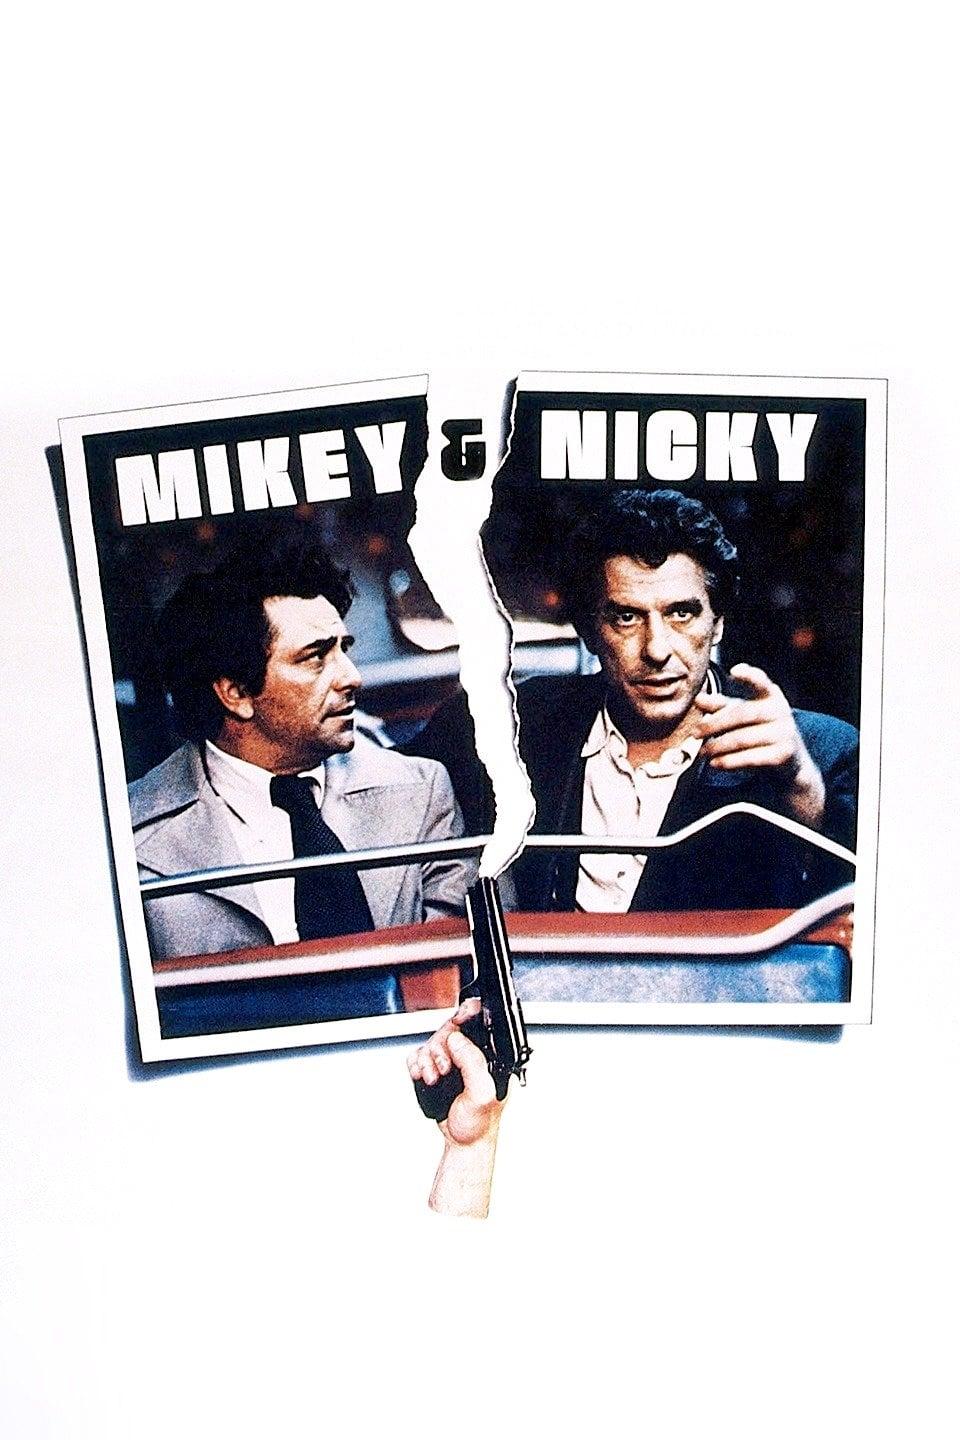 Mikey and Nicky poster